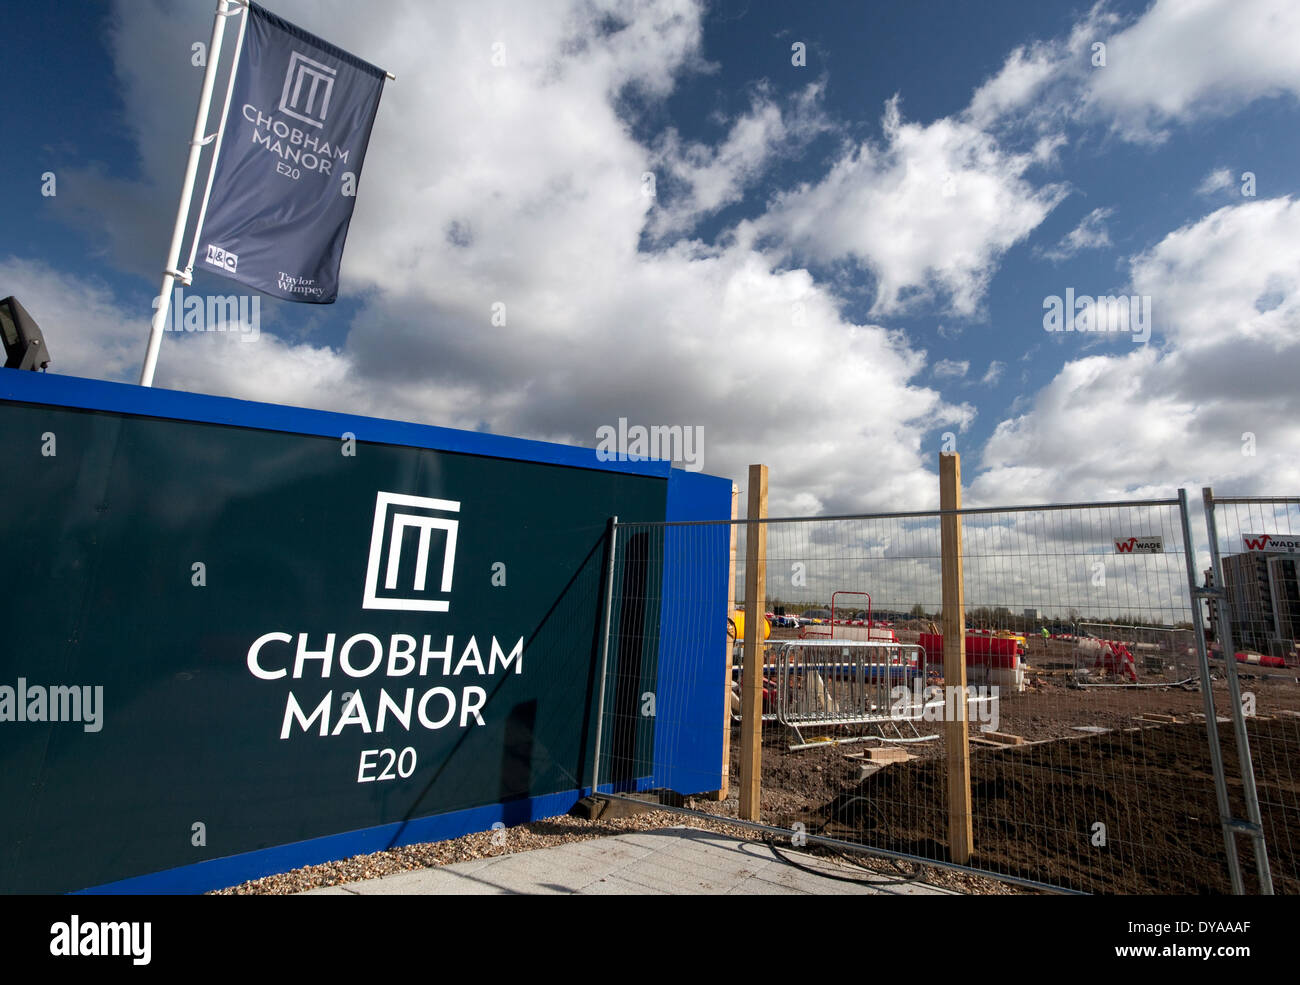 Chobham Manor E20, forthcoming residential development in Queen Elizabeth Olympic Park, London Stock Photo